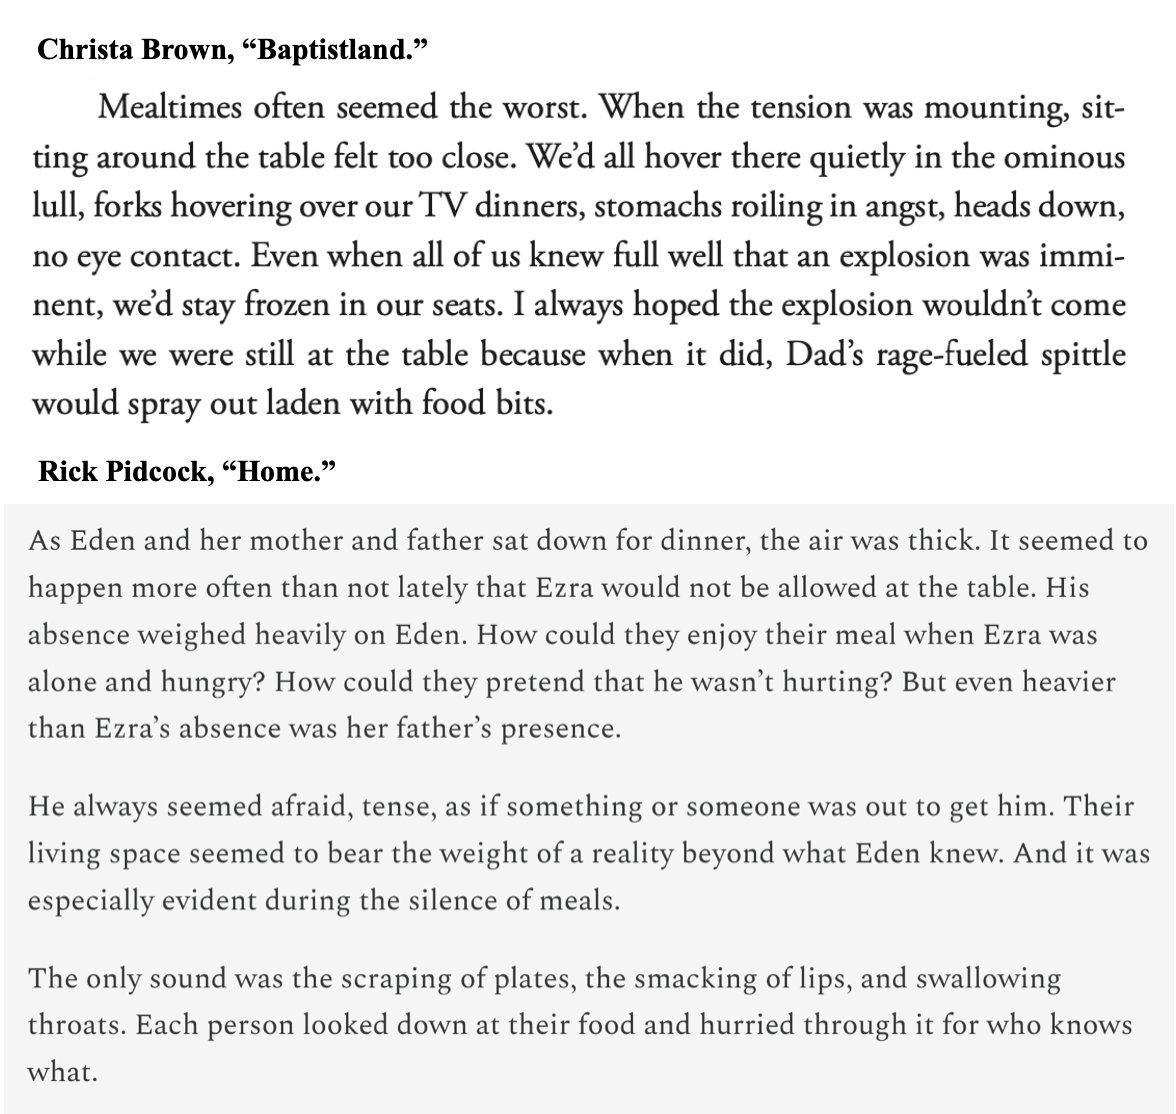 I'm reading through @ChristaBrown777's 'Baptistland,' and thought it was really interesting how she pointed out the experience of mealtimes. It reminded me of a short story I wrote called 'Home' that described a similar experience. Mealtimes must be a common wound.